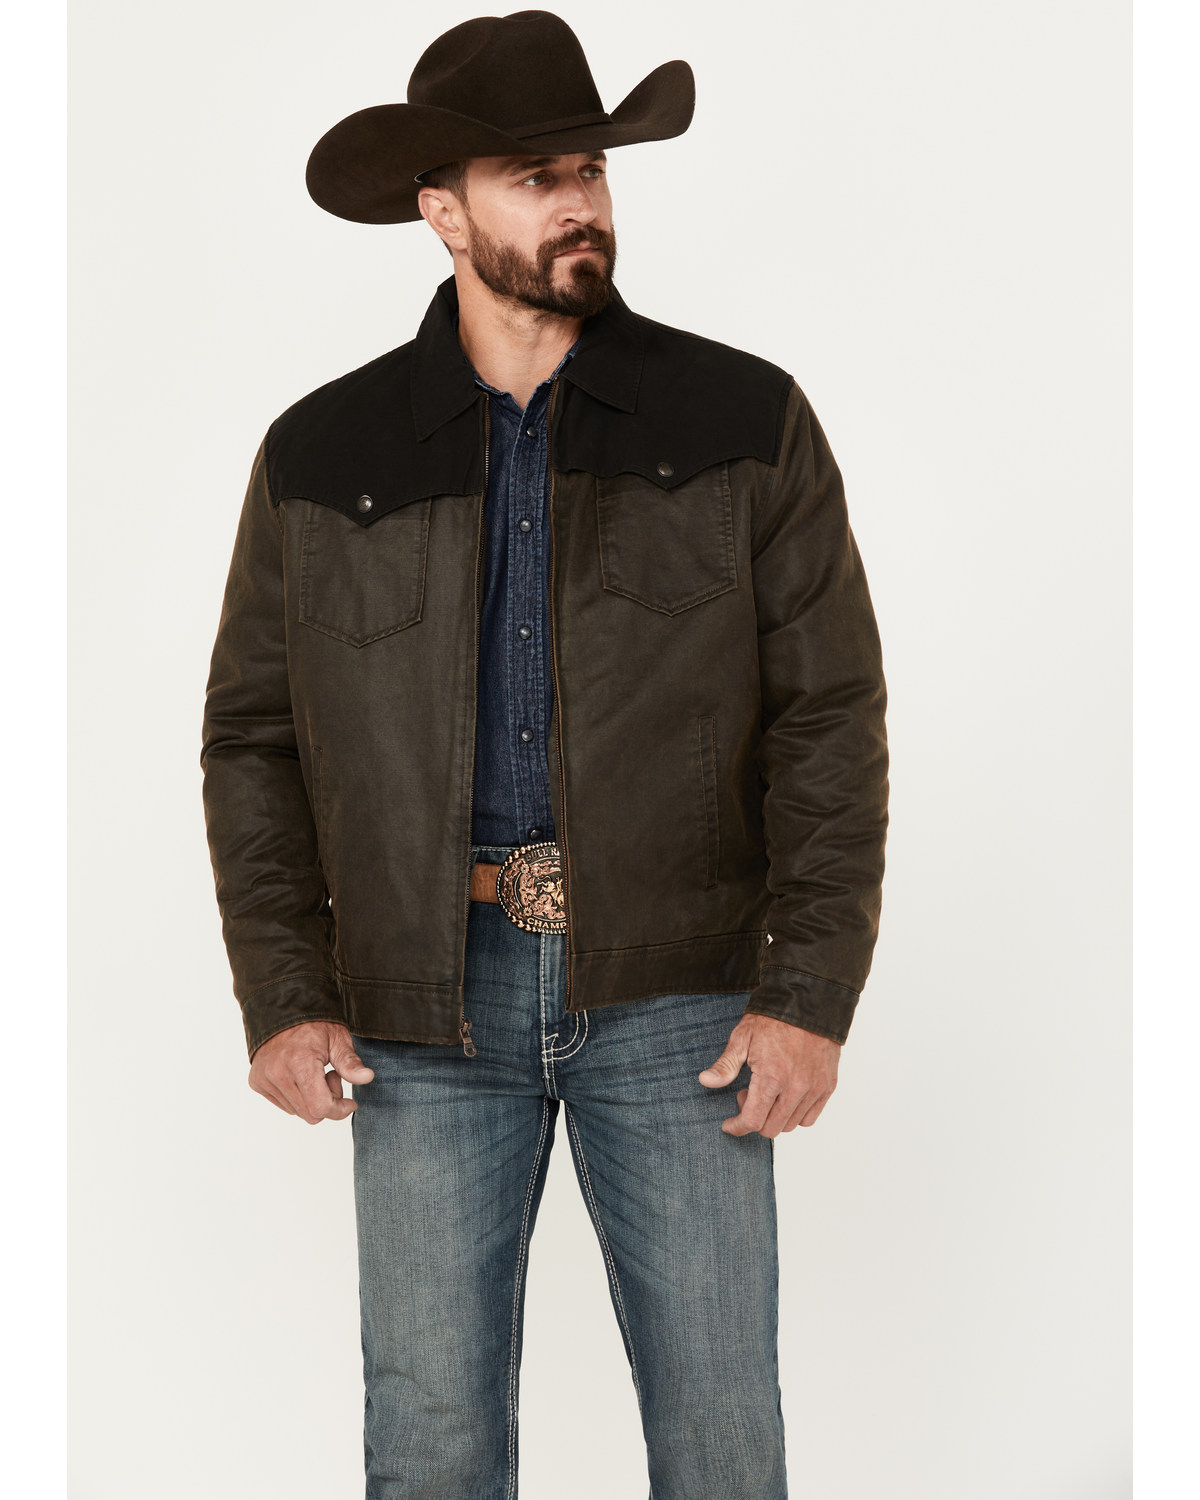 Cripple Creek Men's Two Tone Concealed Carry Ranch Jacket